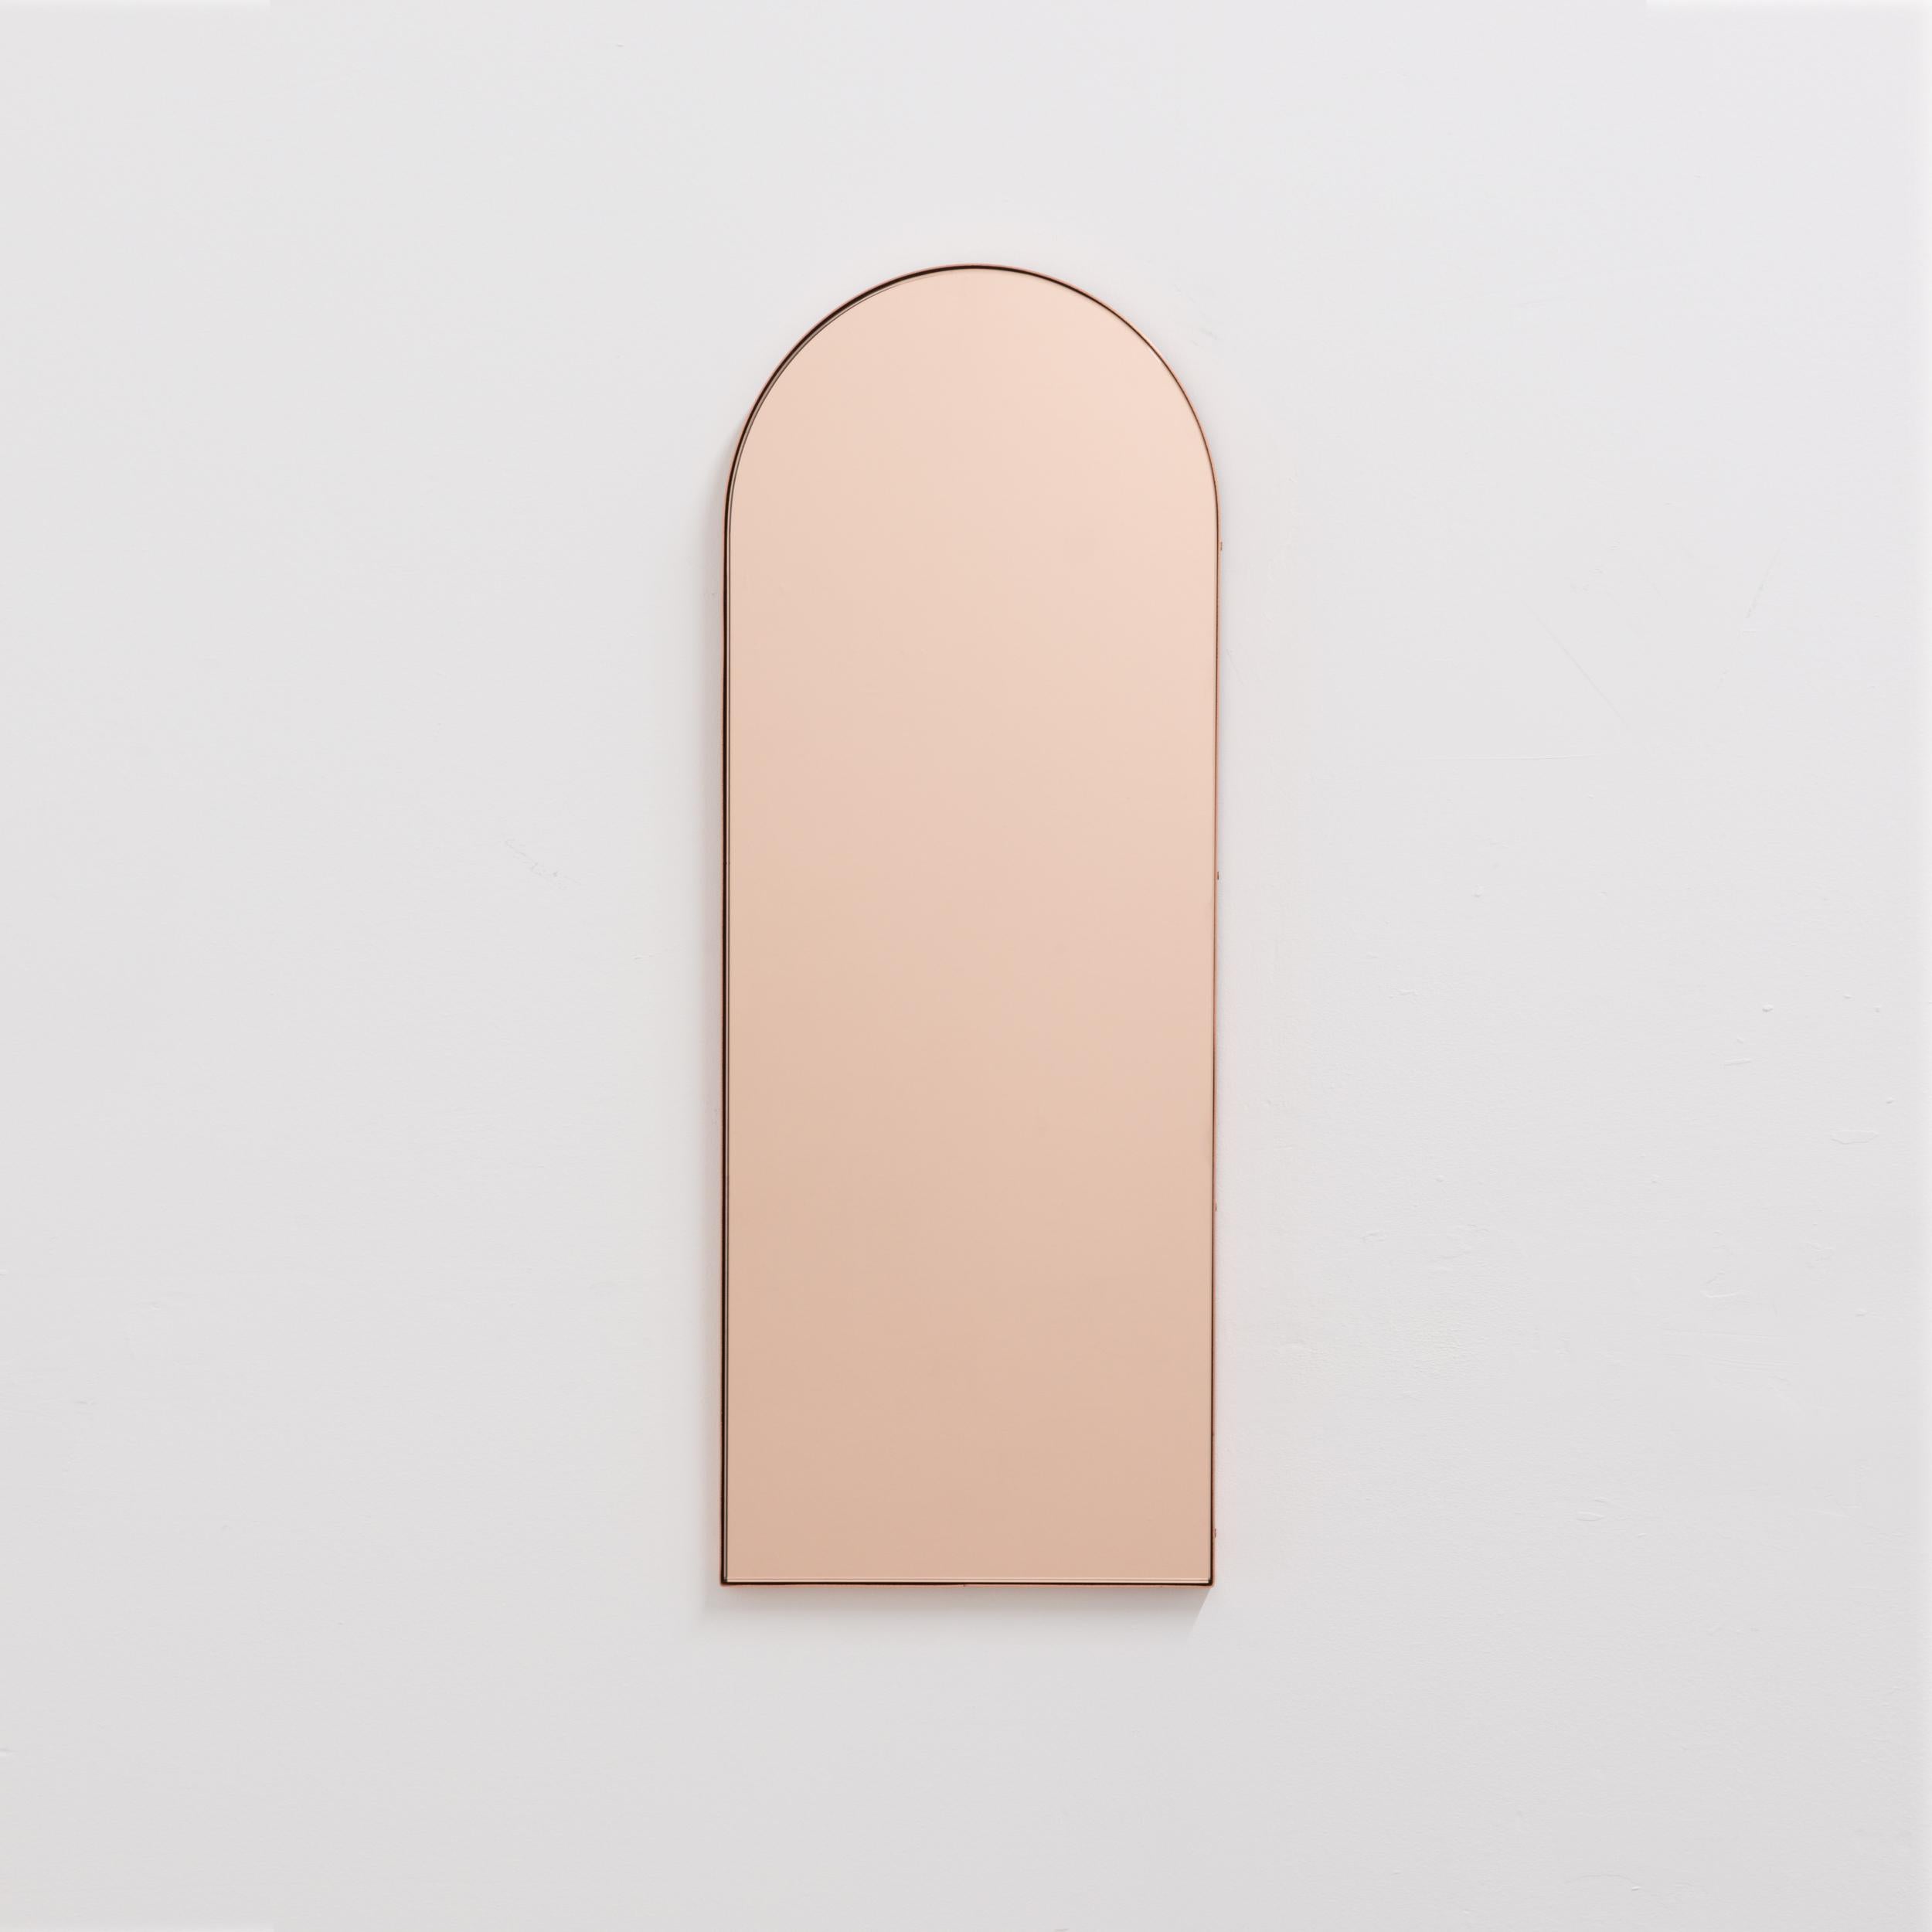 British In Stock Arcus Arched Peach Contemporary Mirror with Copper Frame, Small